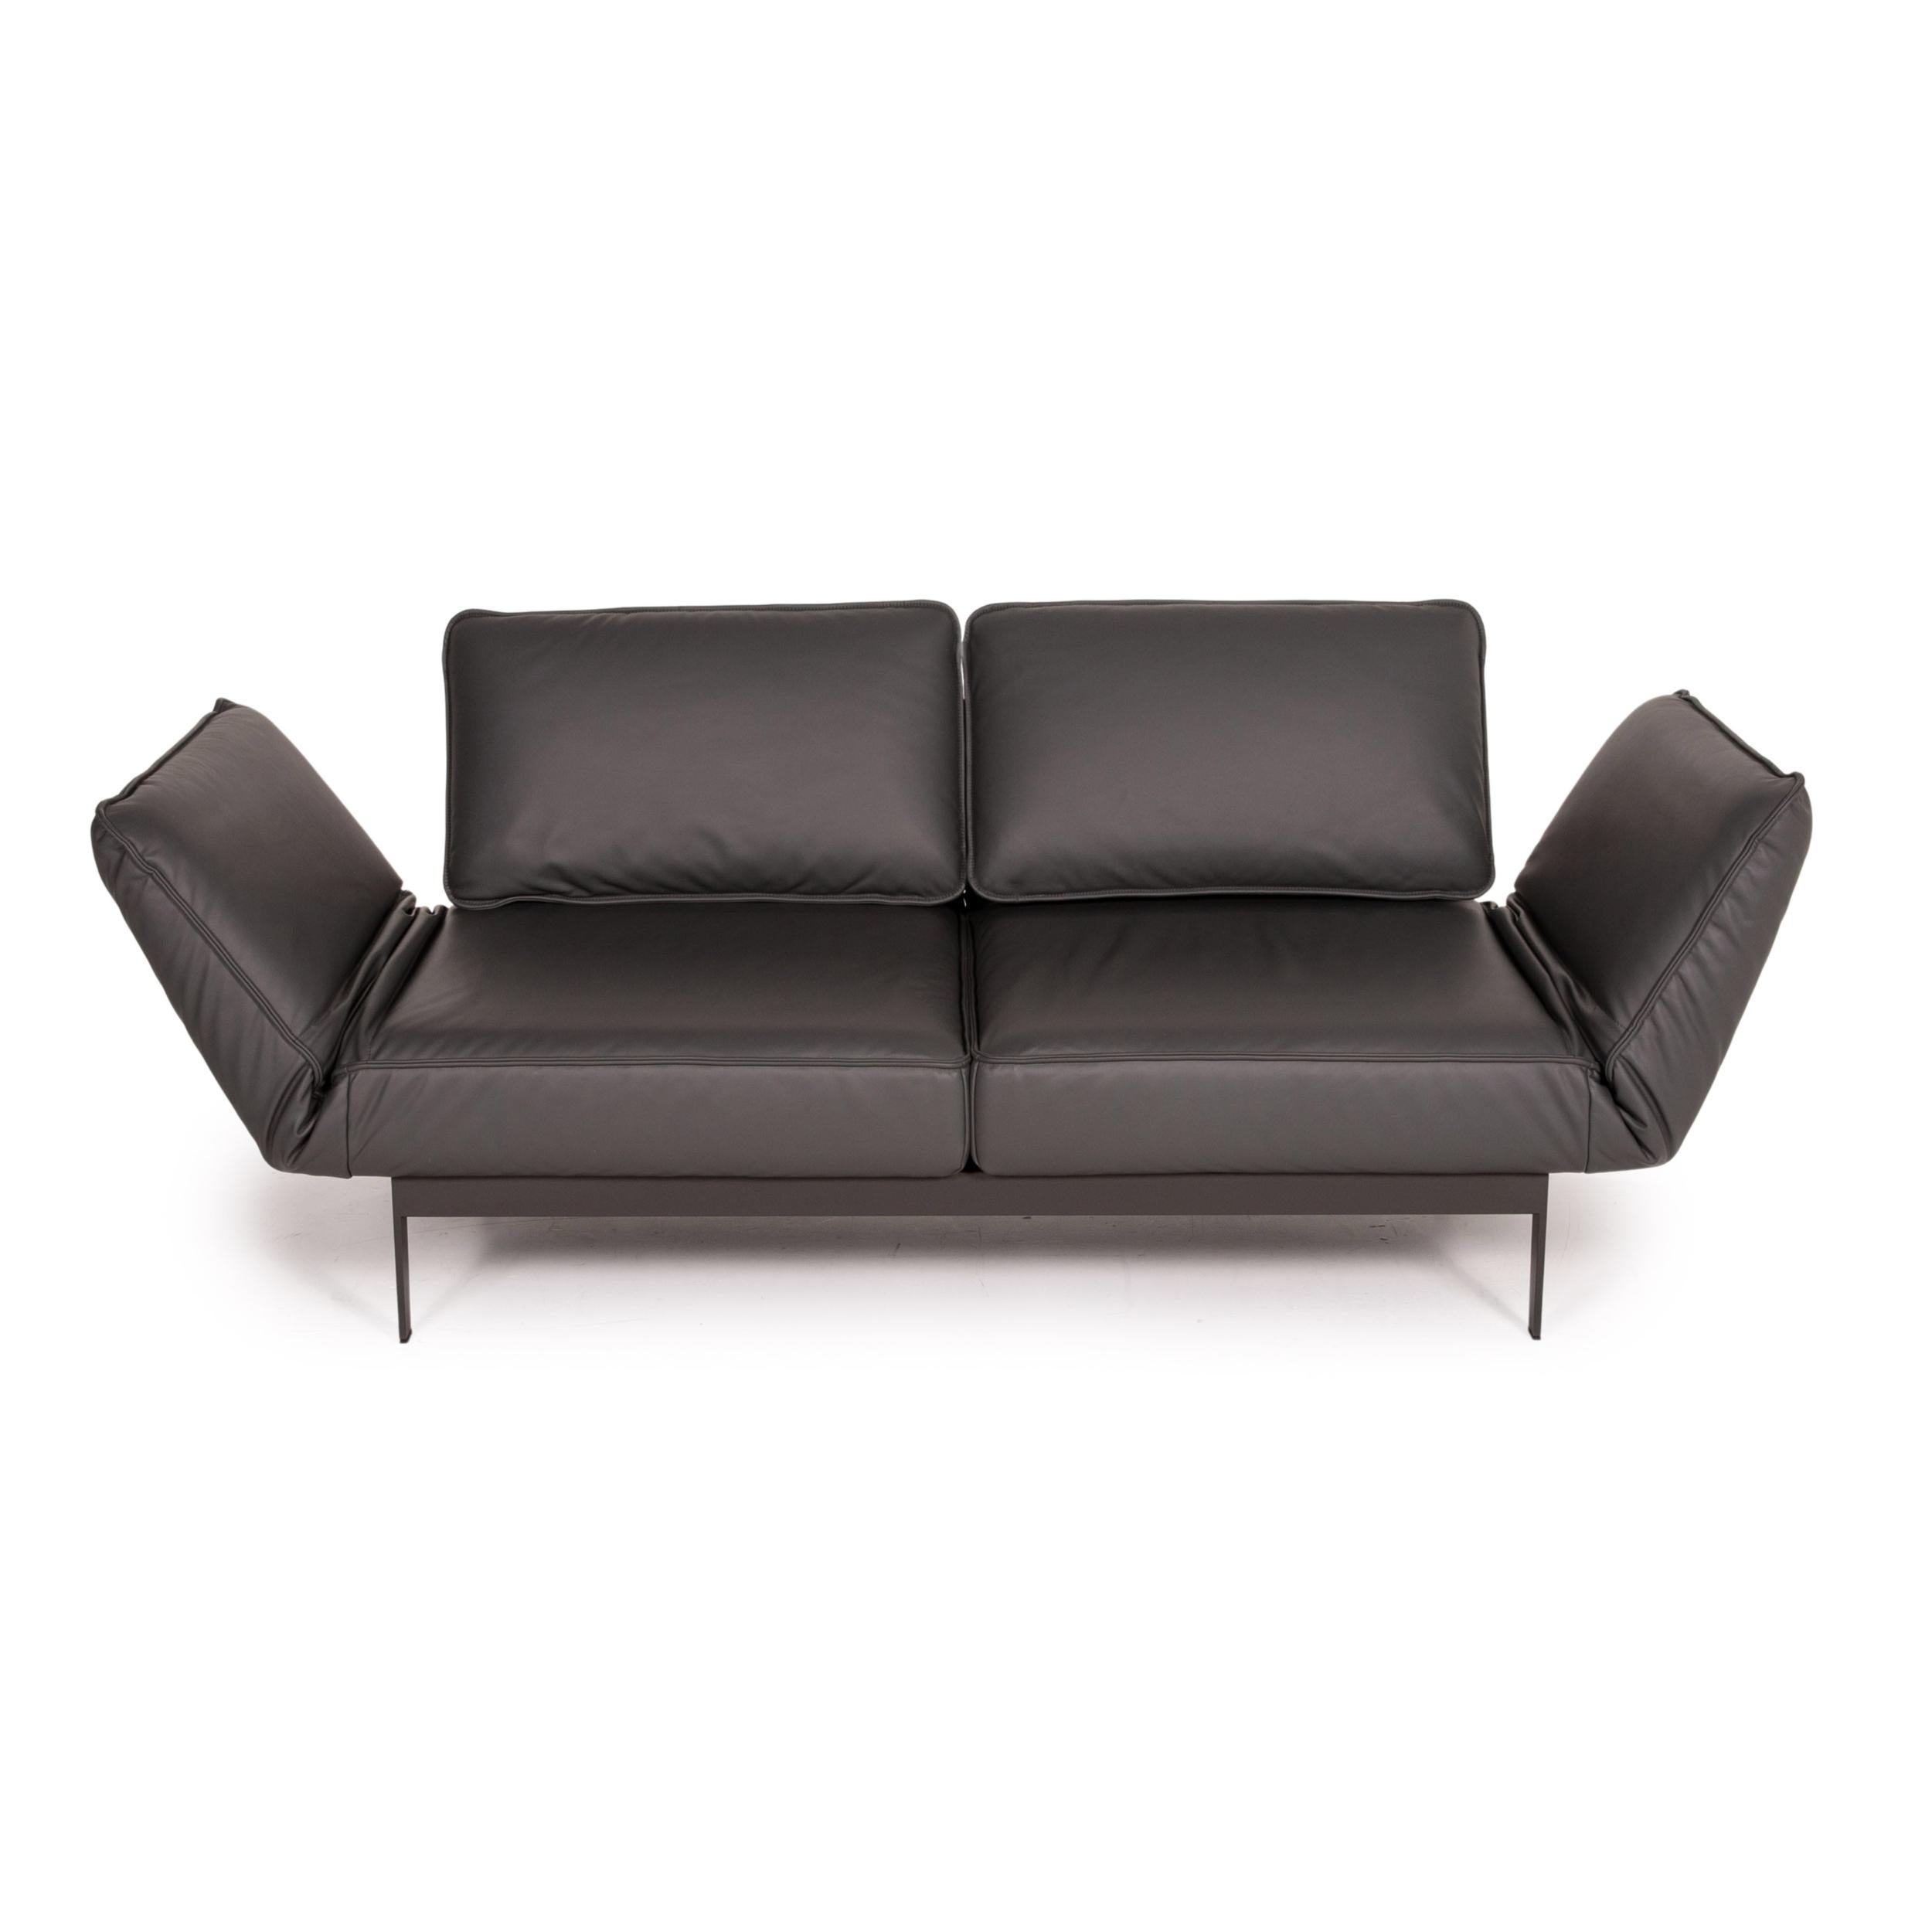 Contemporary Rolf Benz Mera Leather Sofa Gray Dark Gray Two-Seater Function Relax Function